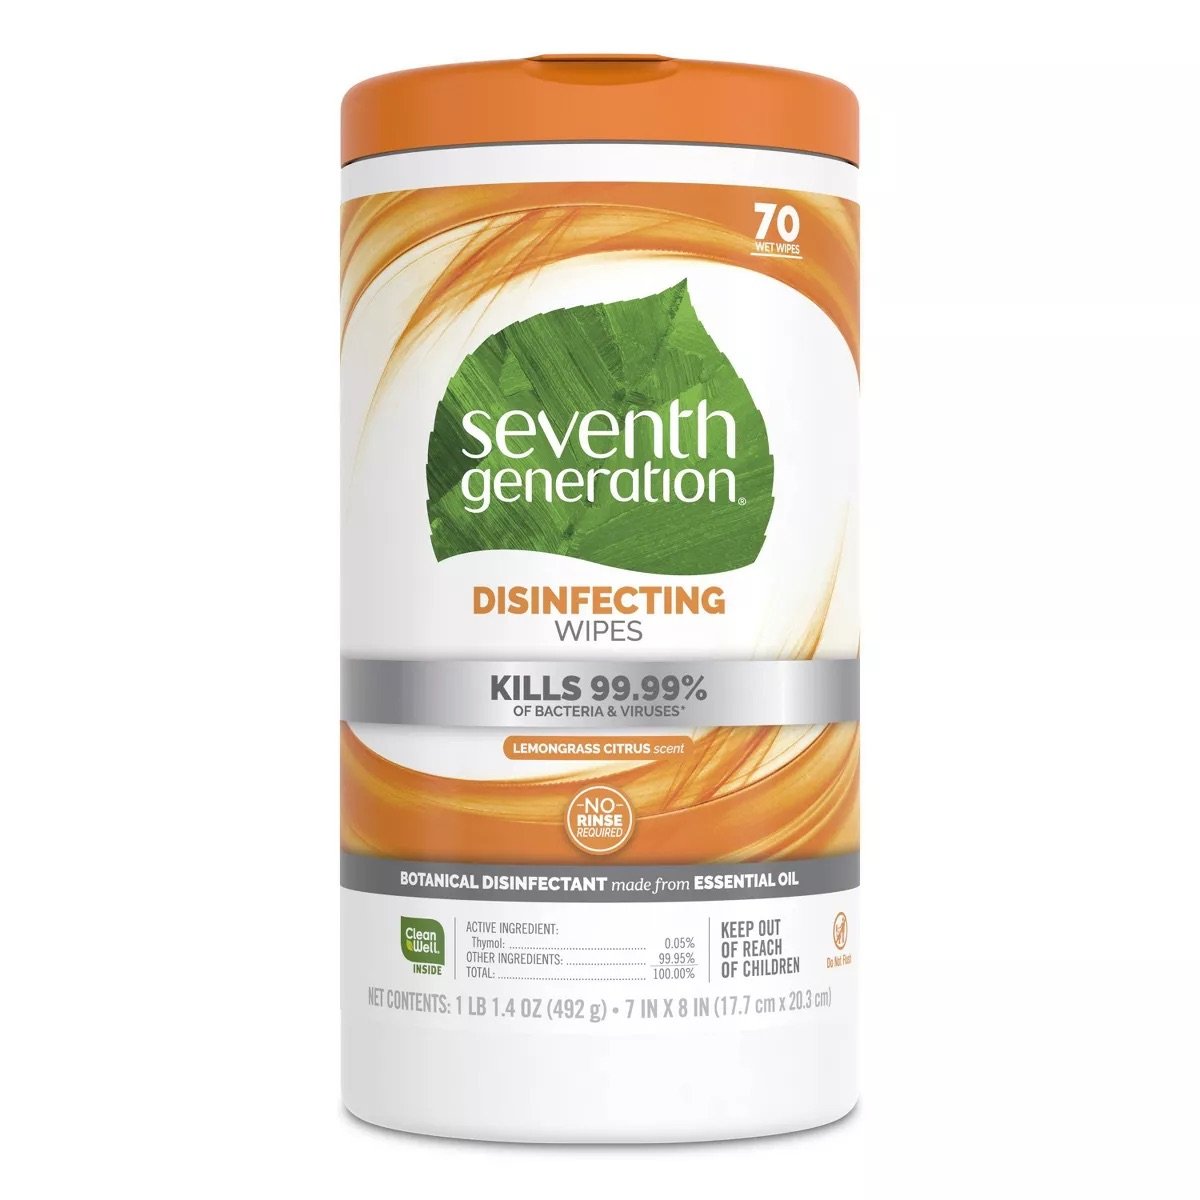 Disinfecting Wipes - Seventh Generation Lemongrass Citrus Disinfecting Wipes.jpeg